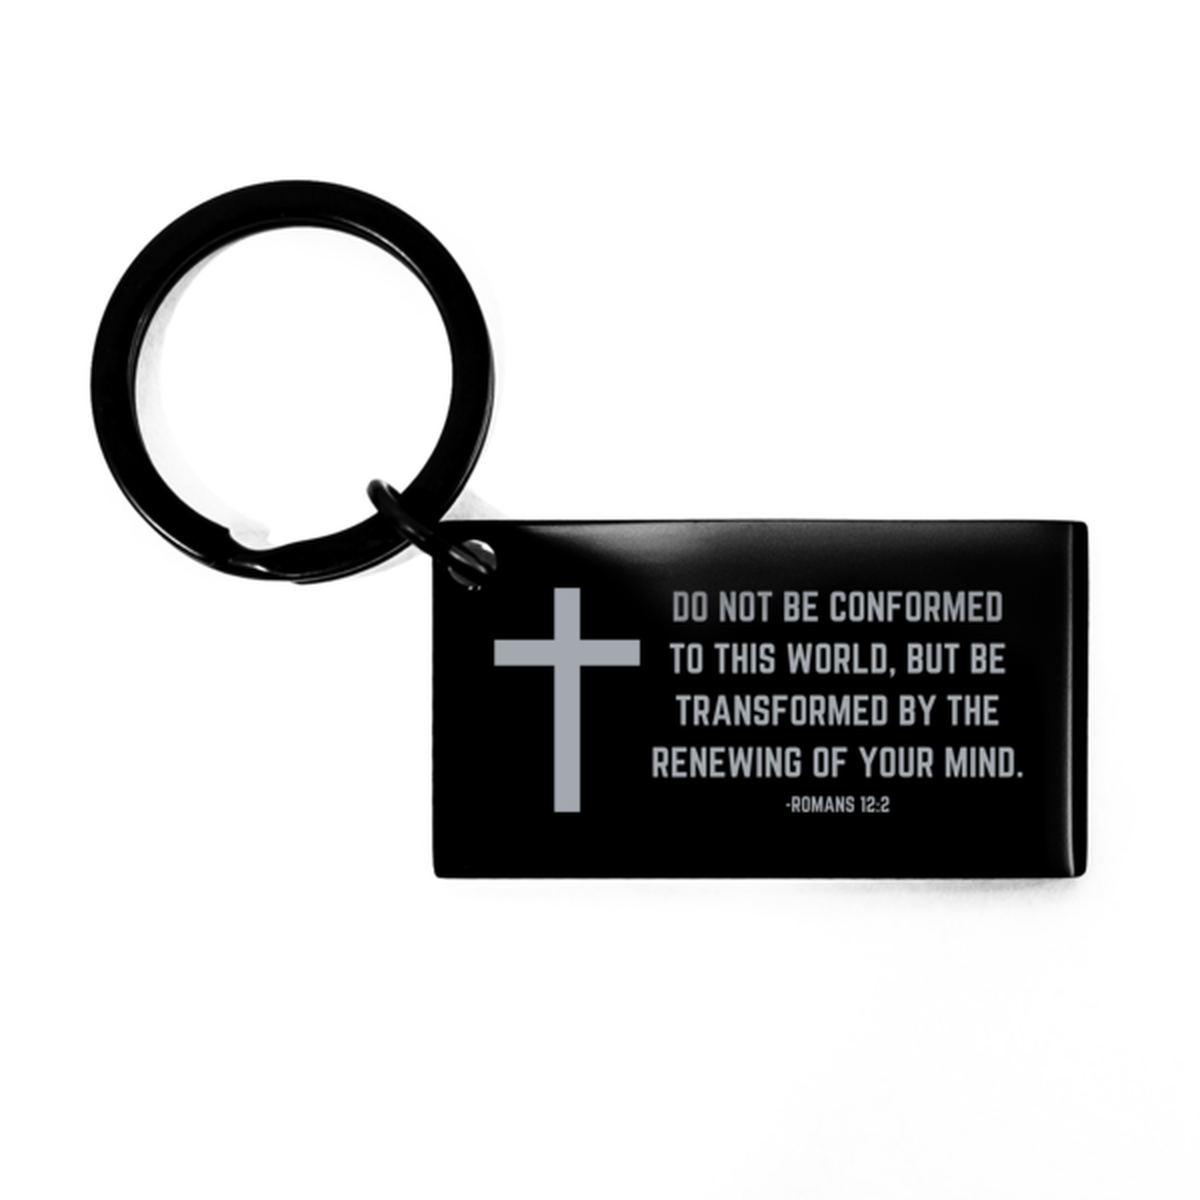 Baptism Gifts For Teenage Boys Girls, Christian Bible Verse Black Keychain, Do not be conformed to this world, Confirmation Gifts, Bible Verse Keyring for Son, Godson, Grandson, Nephew